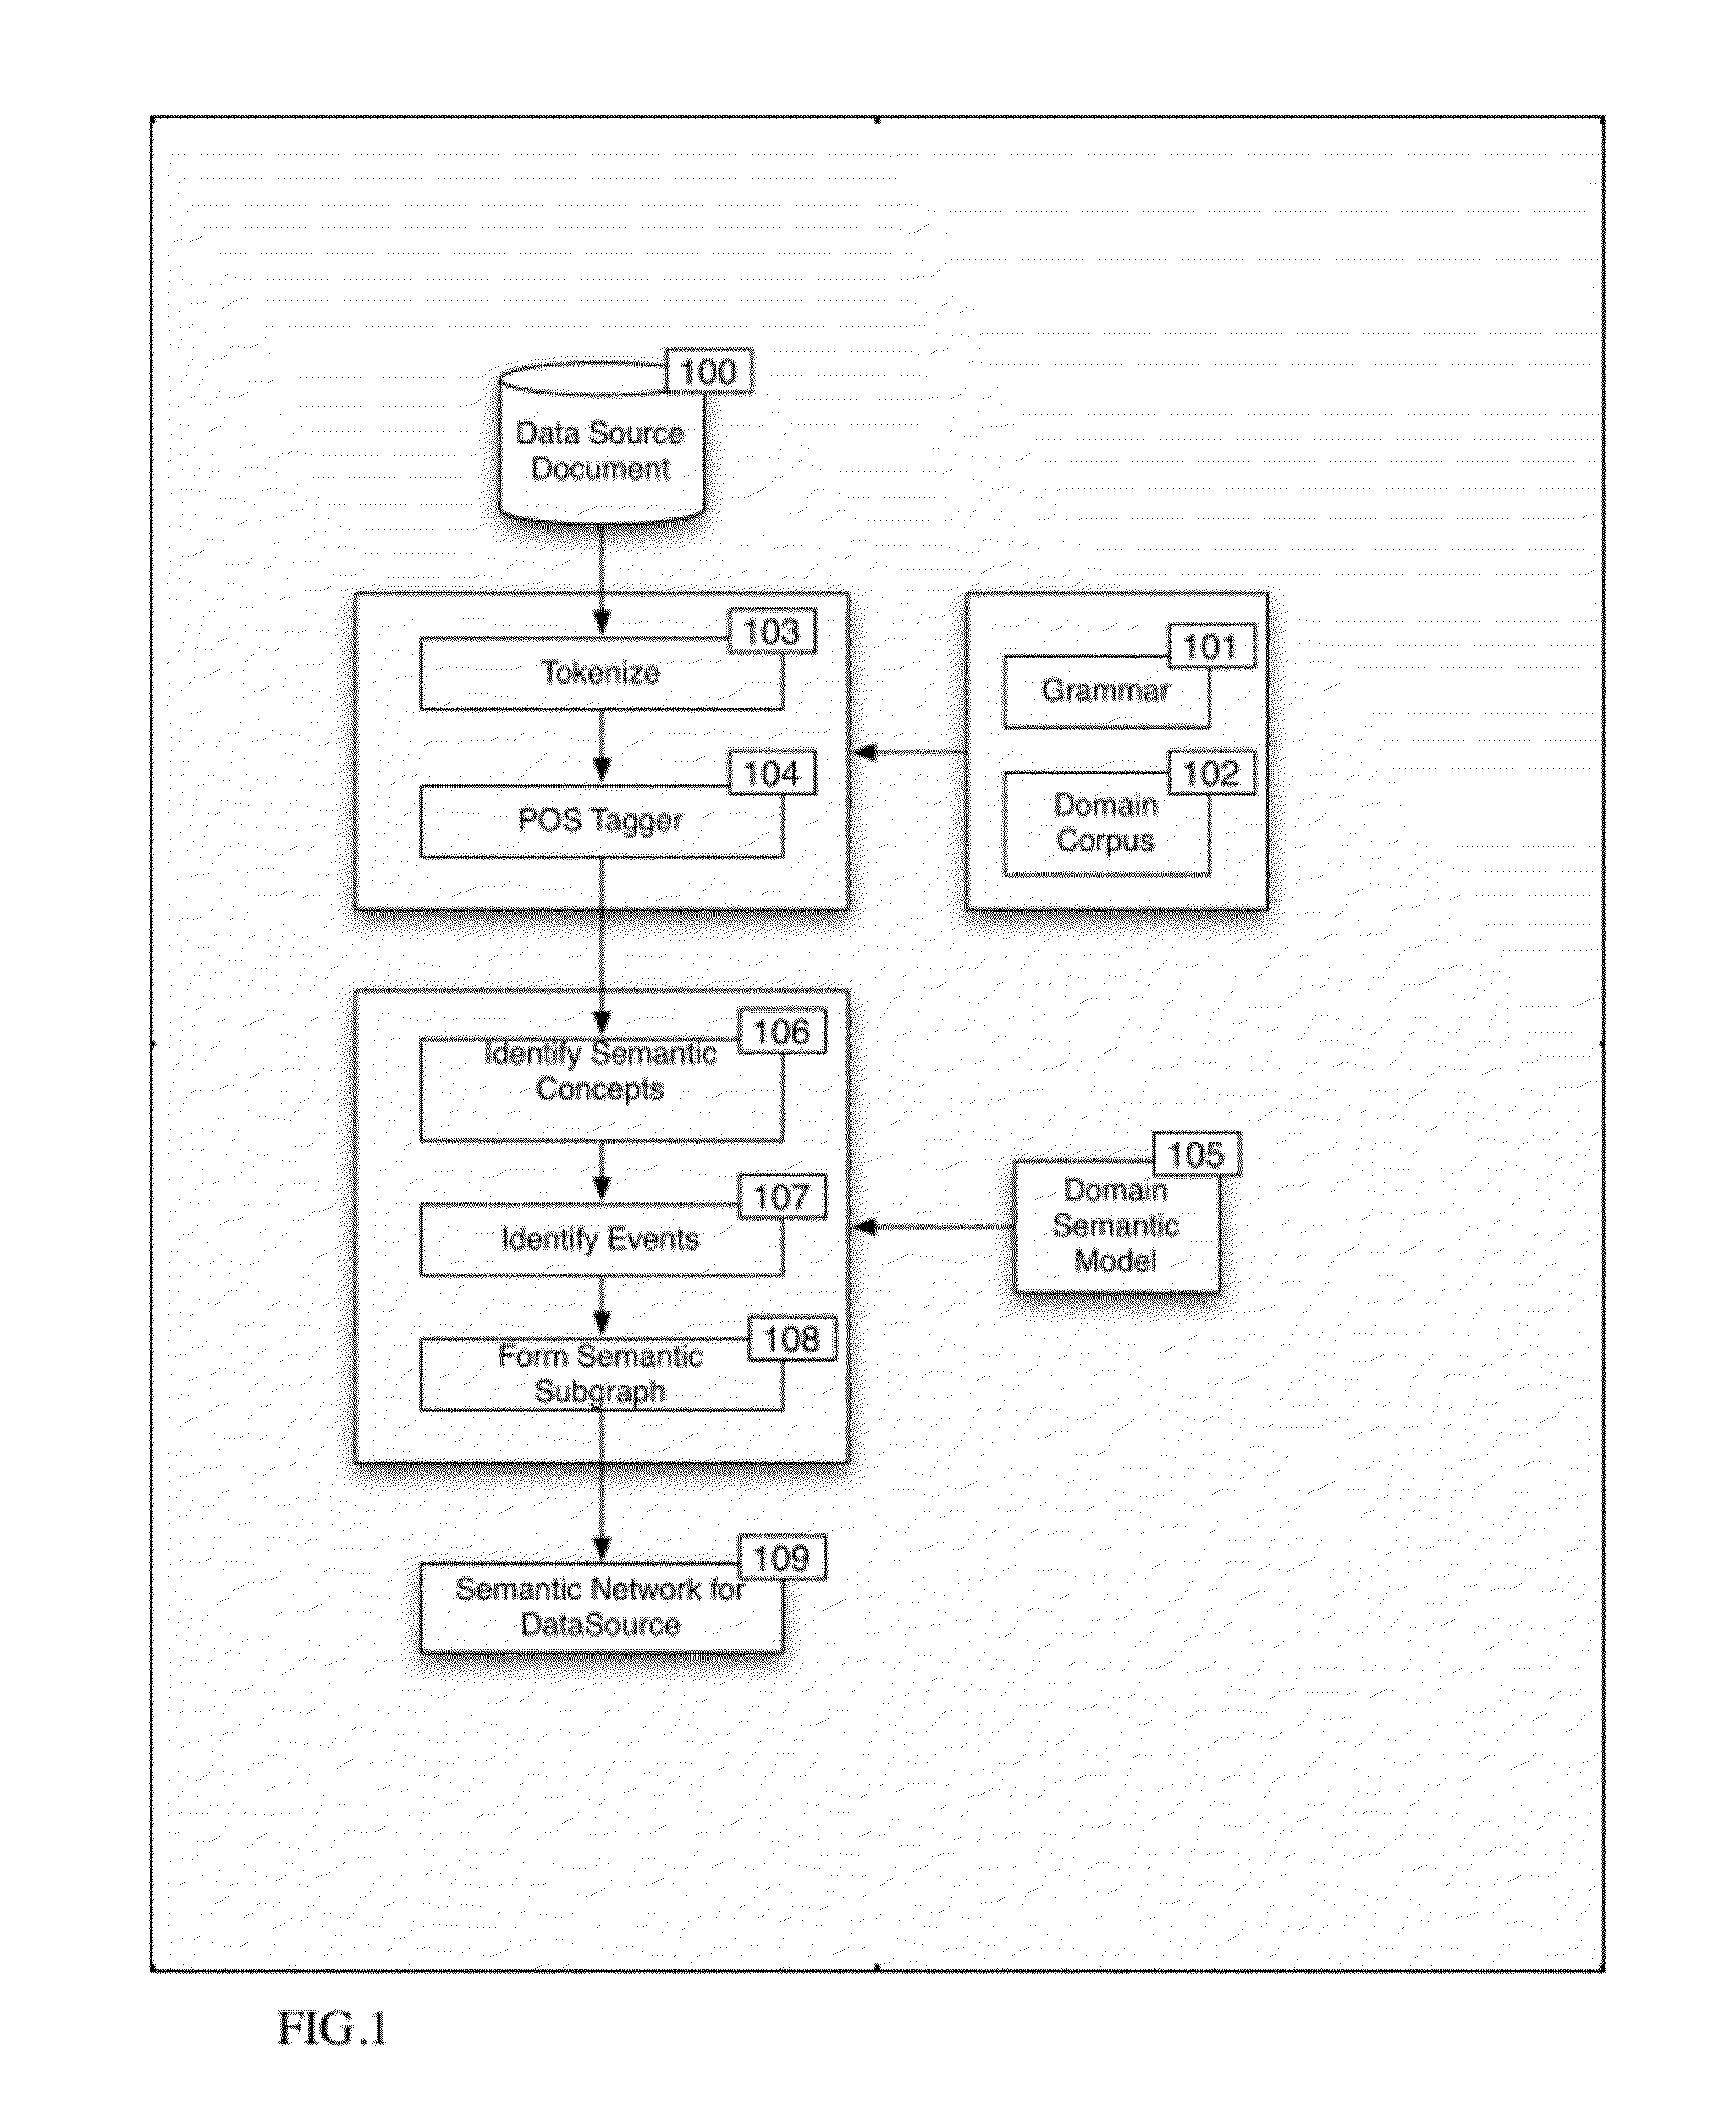 Method and System for Automated Construction of Project Teams